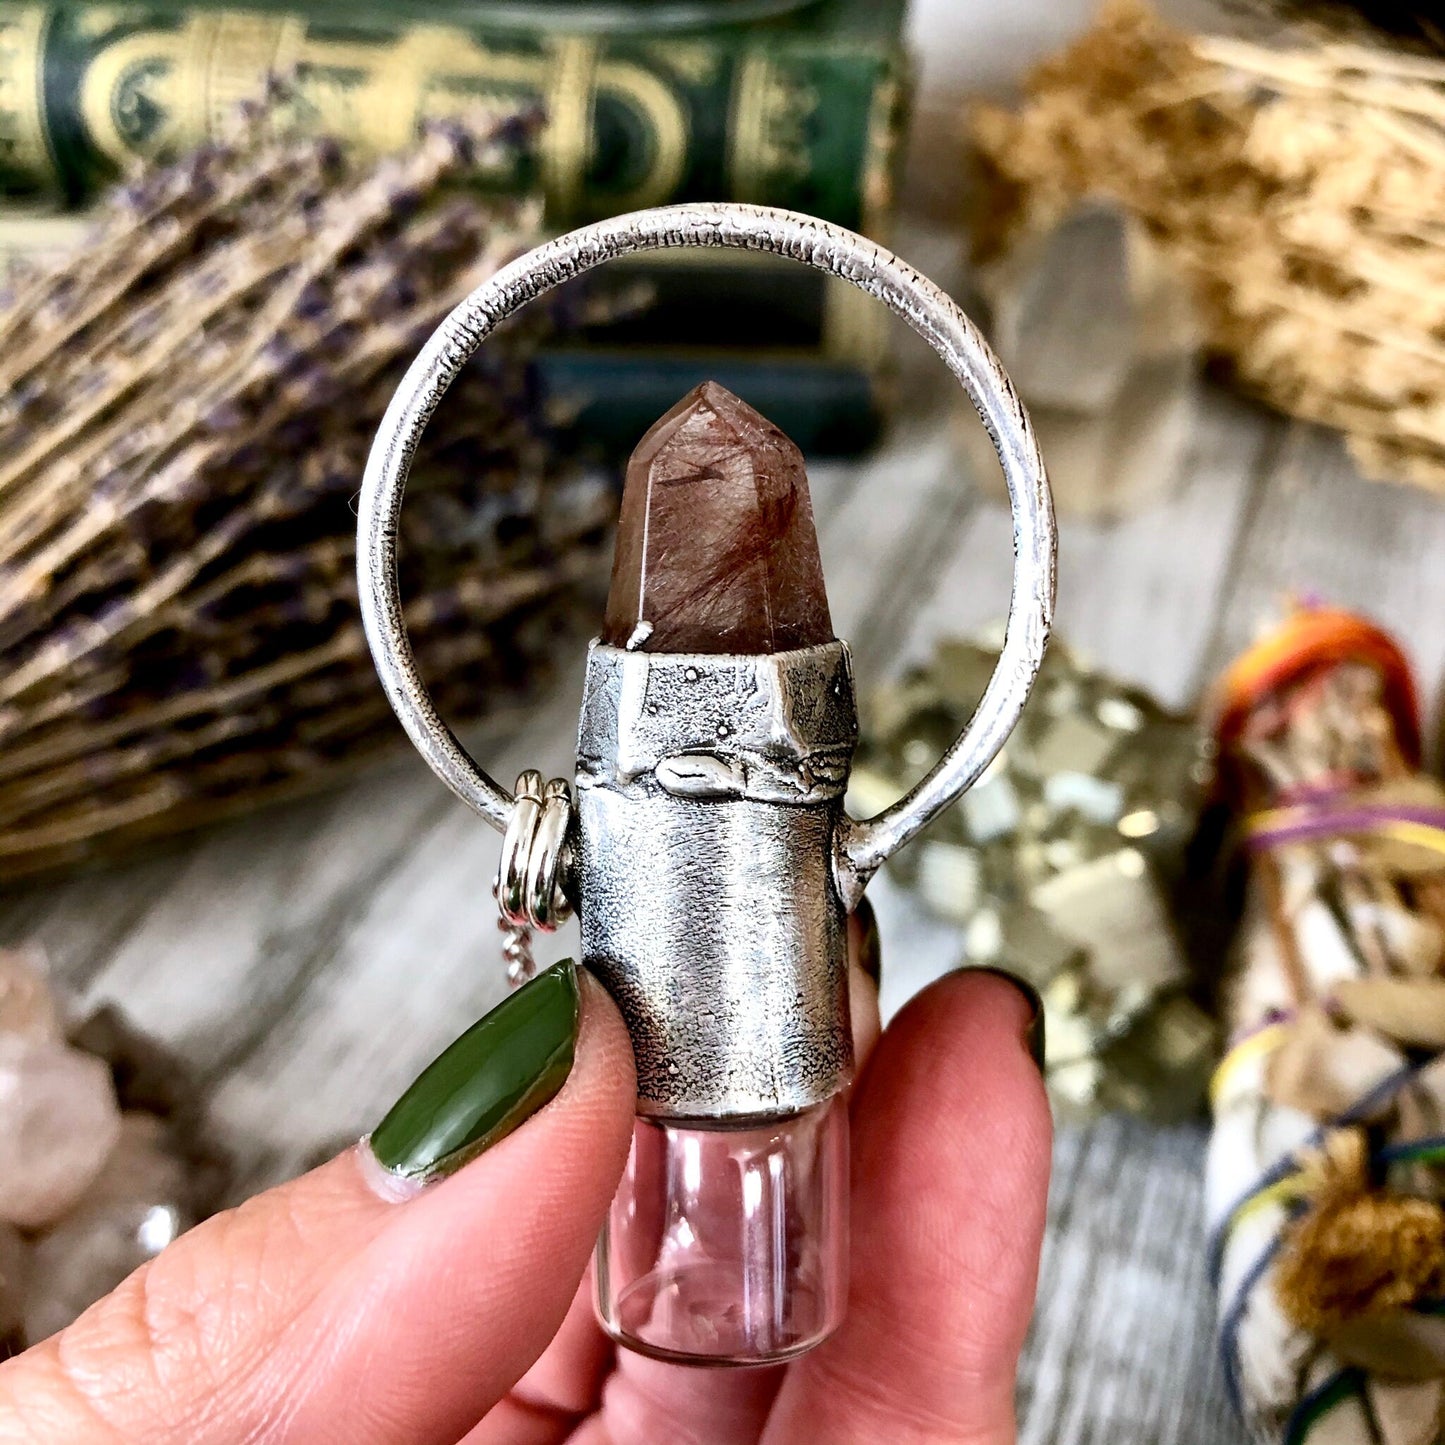 Crystal Jewelry, Crystal Necklaces, Diffuser Jewelry, Diffuser Necklace, Essential Oil Bottle, Essential oil roller, Essential Oil Vial, Essential Oils, Etsy ID: 1063652273, FOXLARK- NECKLACES, Jewelry, Necklaces, oil jewelry, Oil Necklace, Raw crystal ne